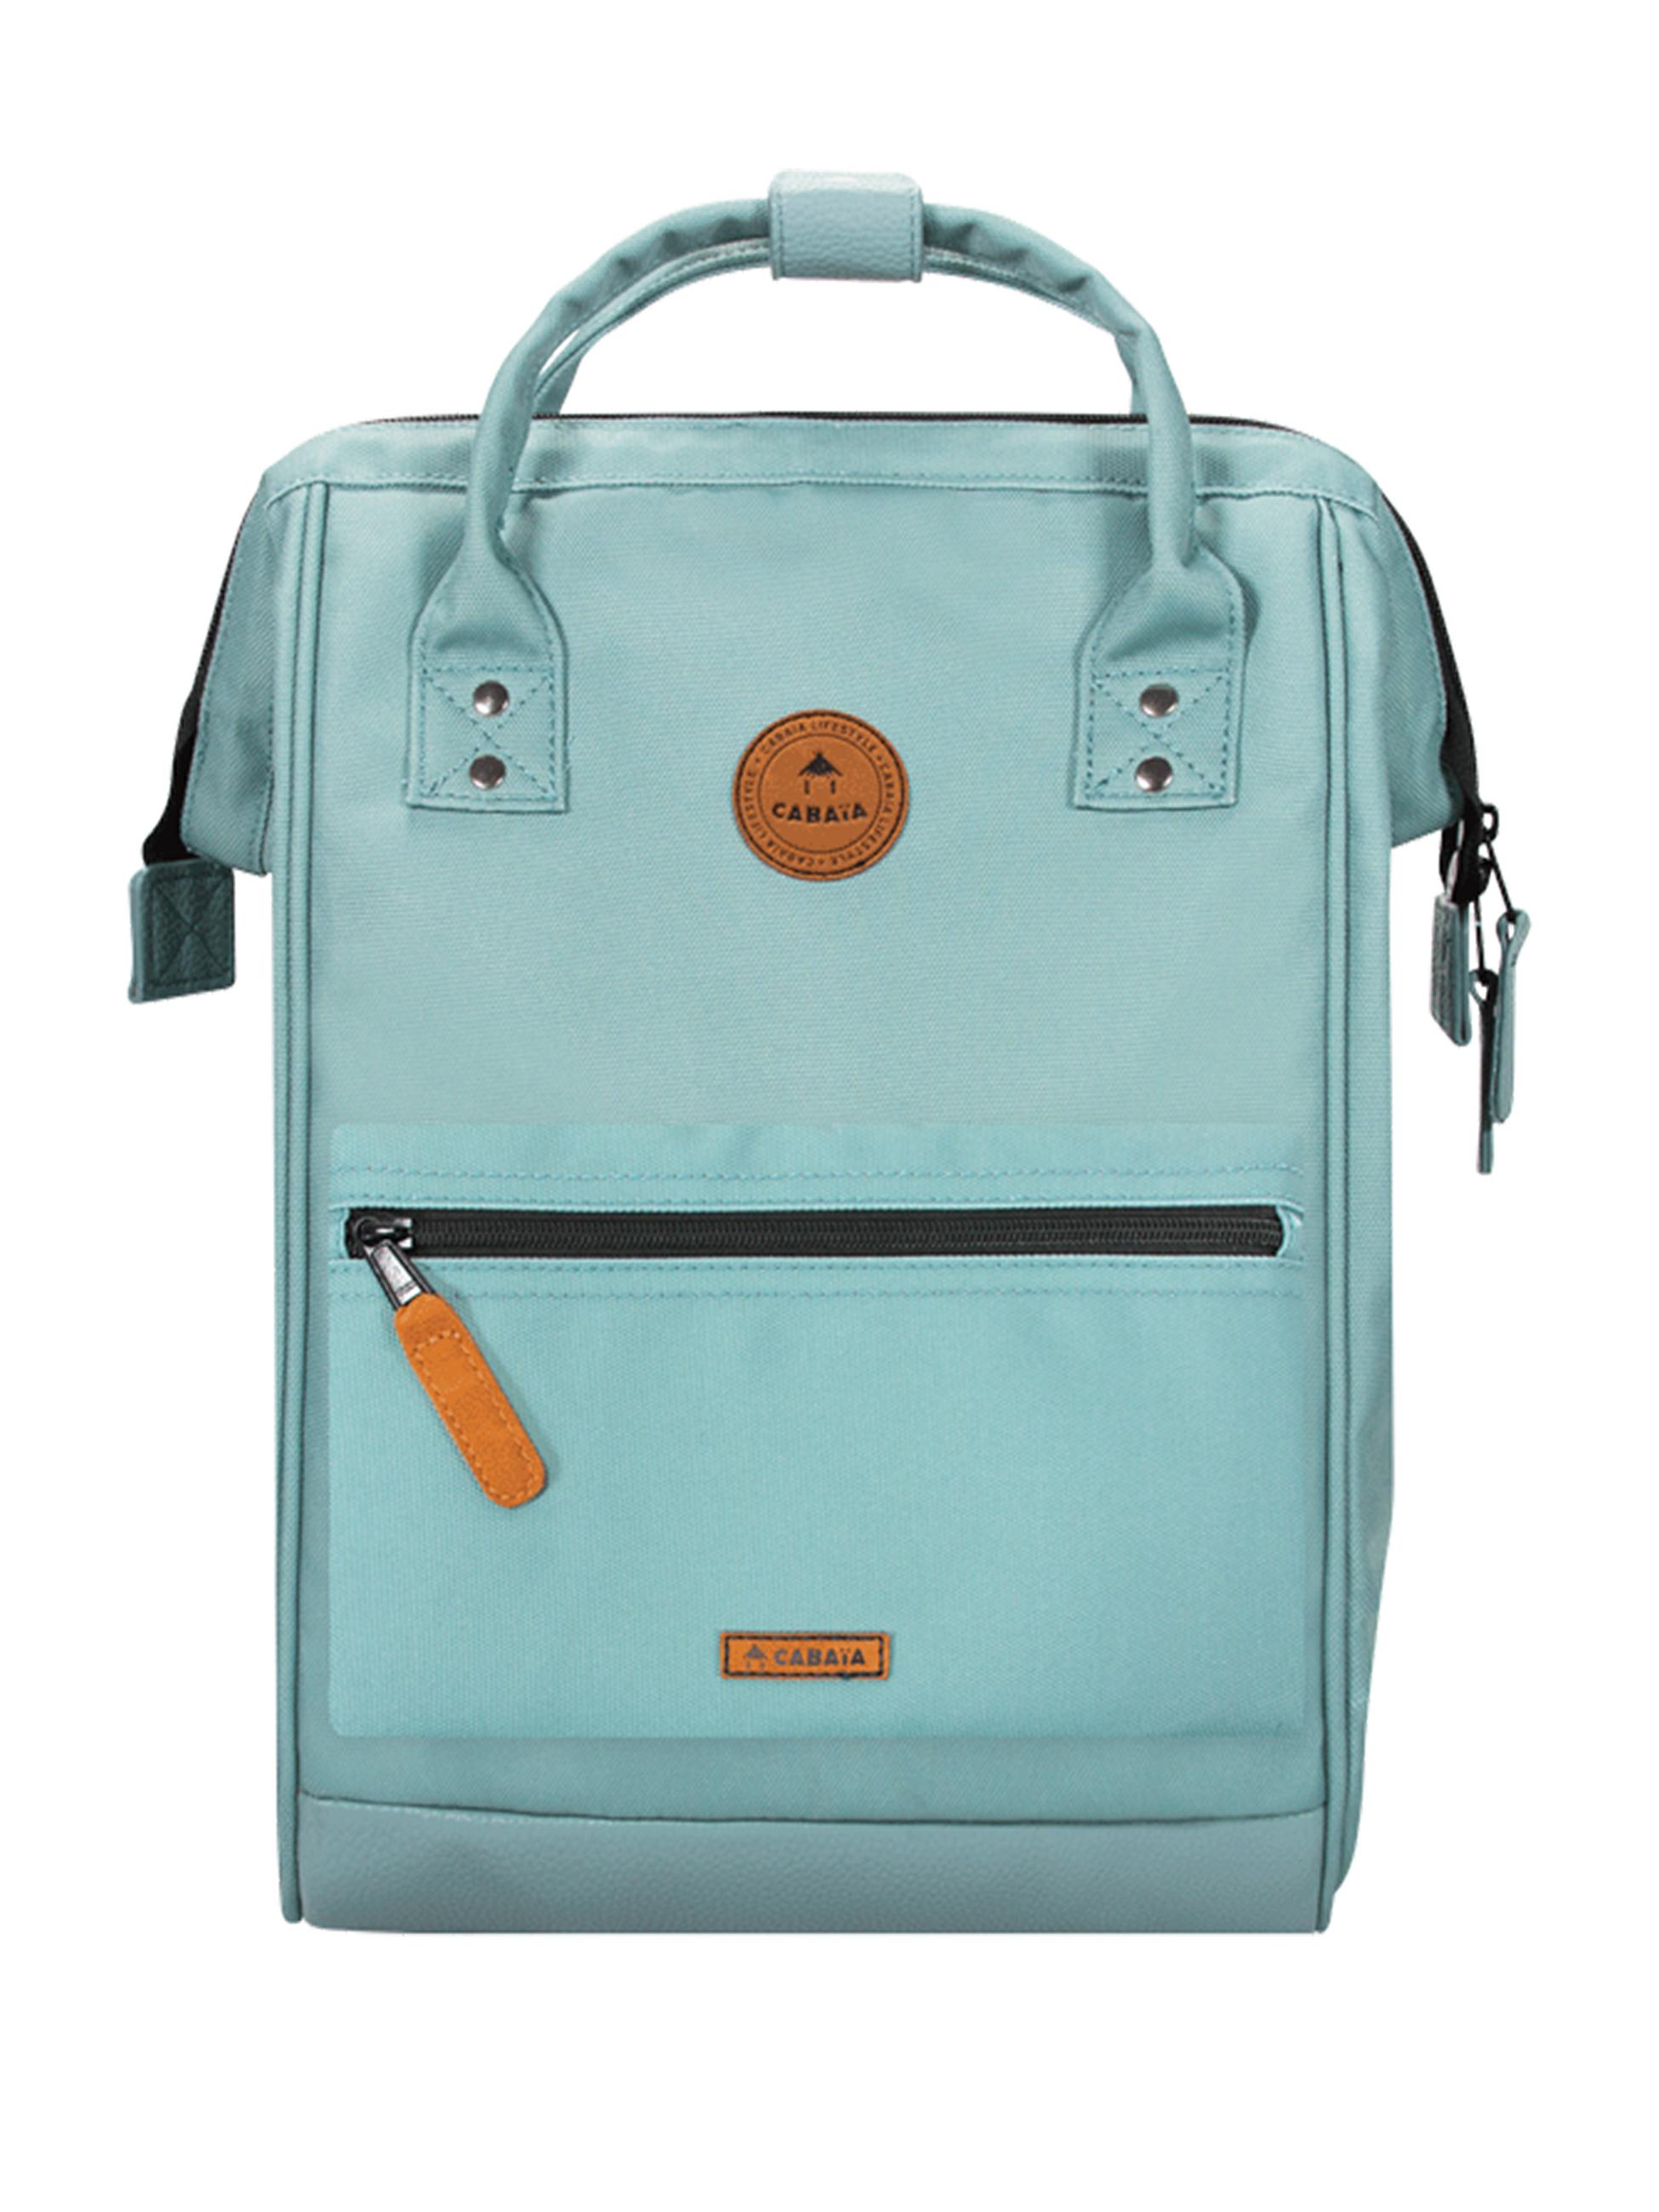 Рюкзак Cabaia Tages Adventurer M Recycled, цвет Seville Light Blue seville and andalucia